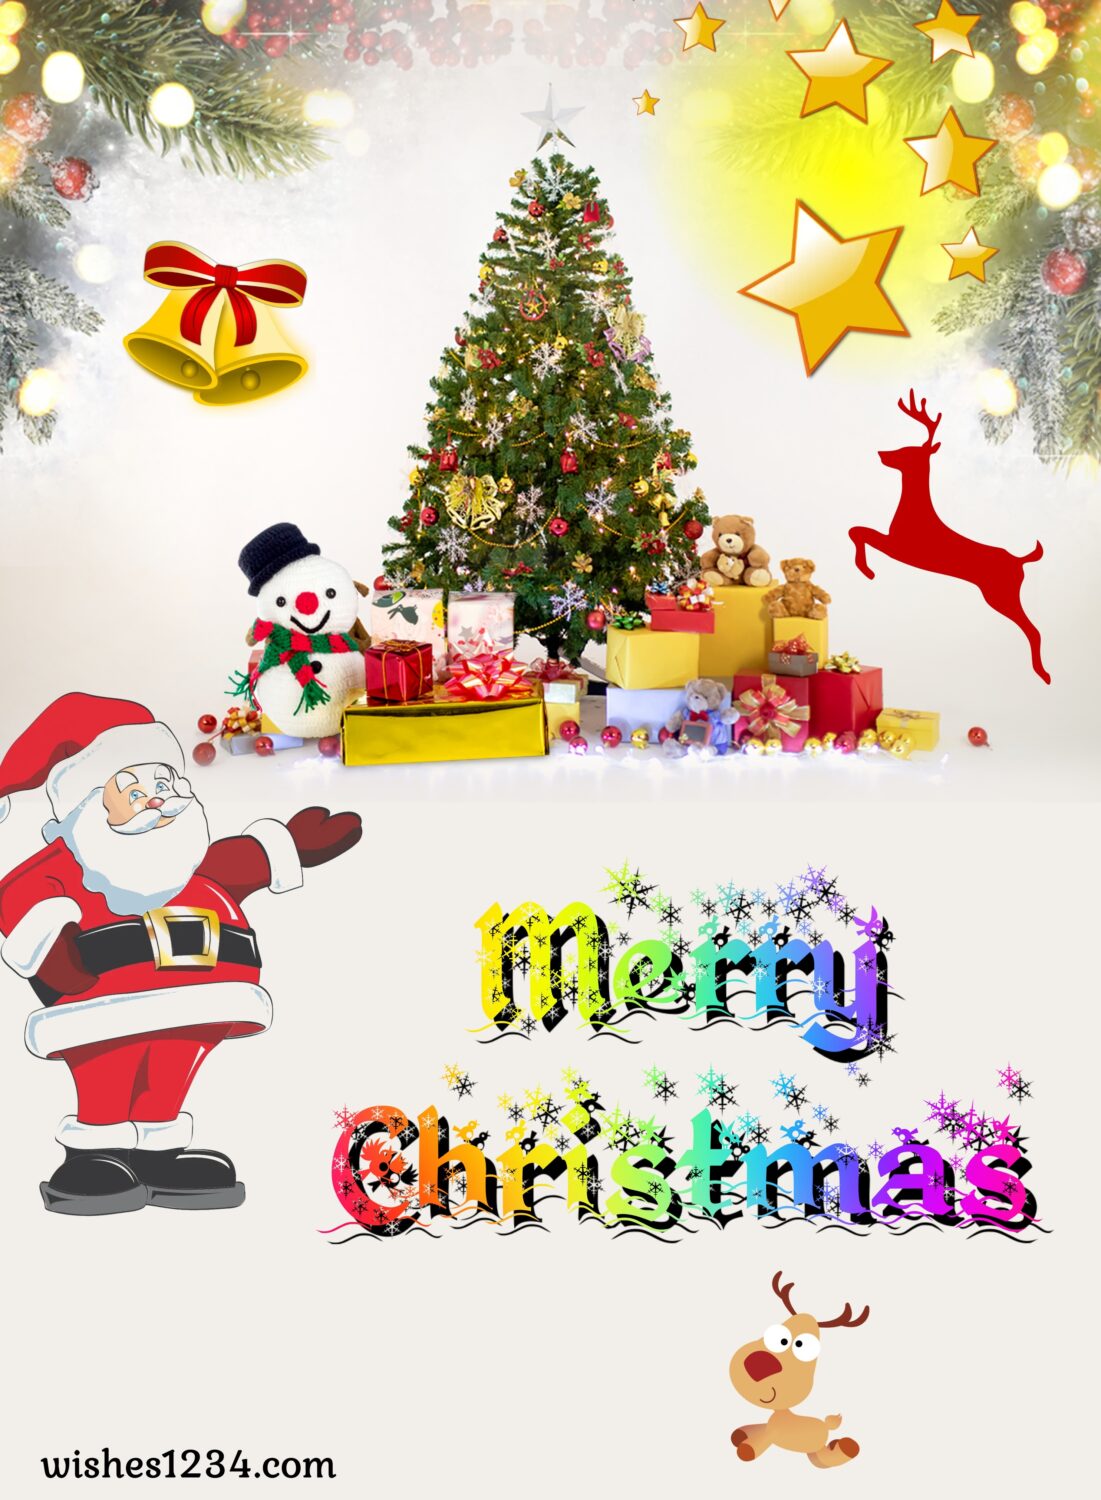 Christmas tree with Santa and gifts, Merry Christmas Quotes & short wishes.